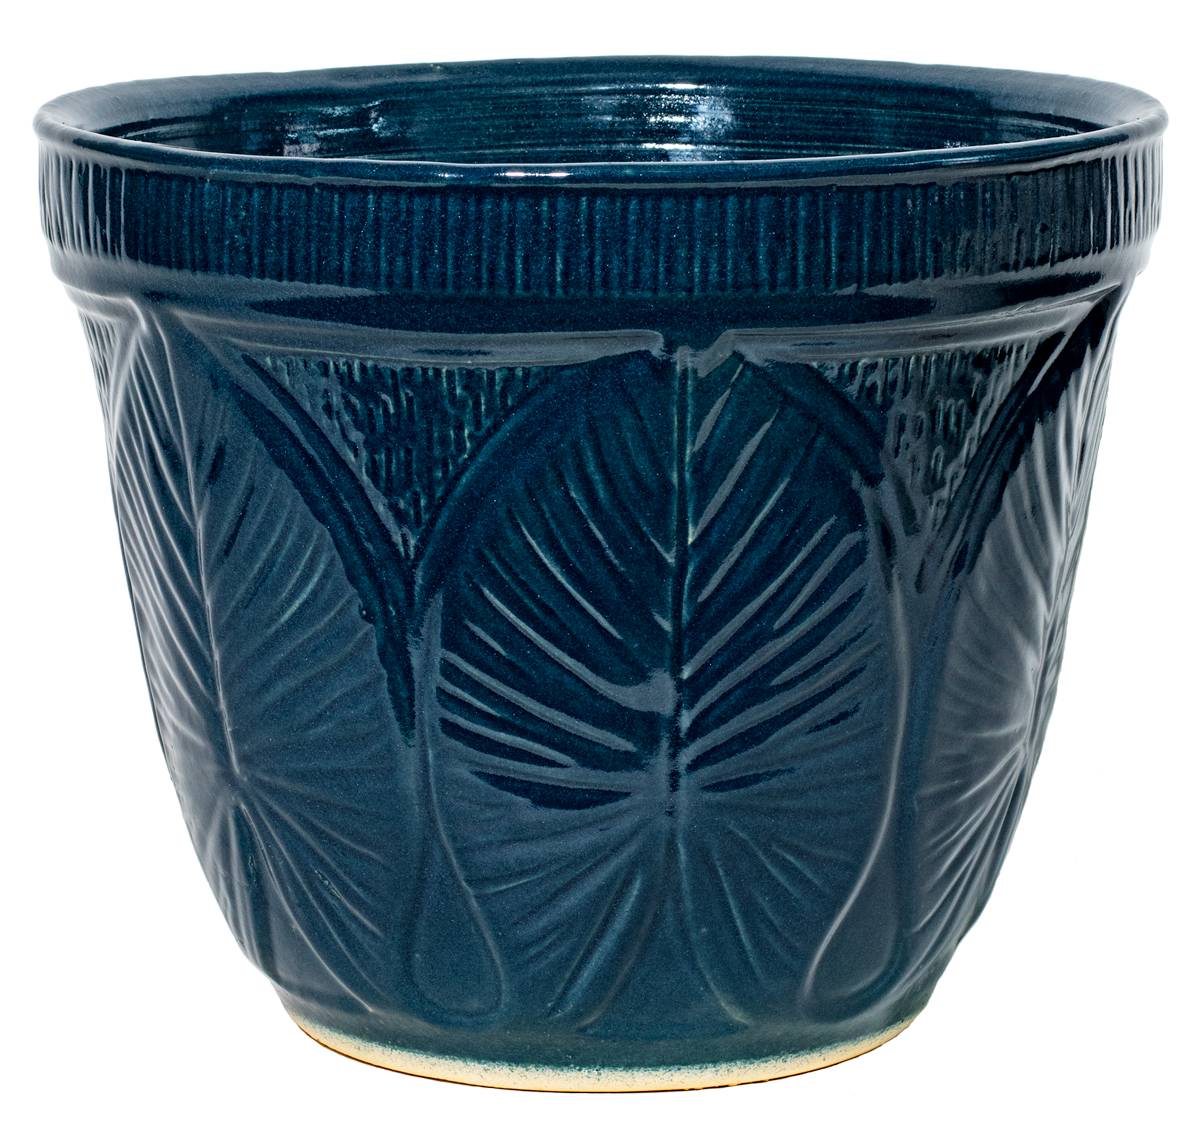 Large outdoor patio planter in blue glaze with leaf design